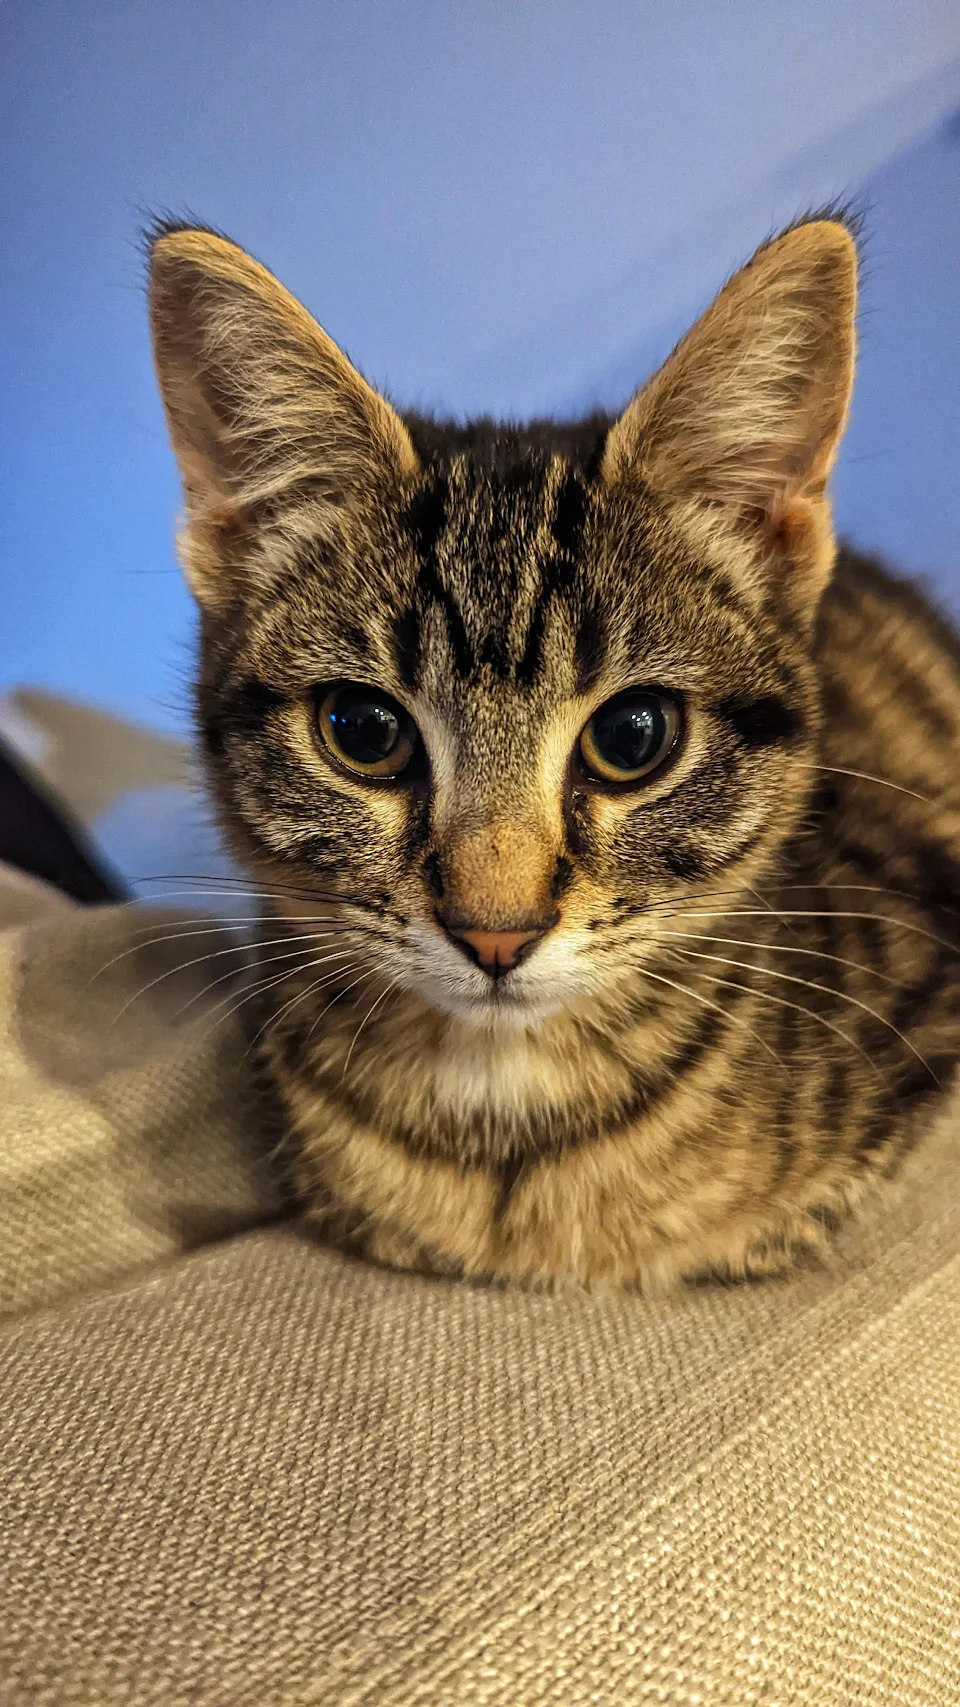 The teensiest little loaf ever. Meet Maisie, our tiny tabby.